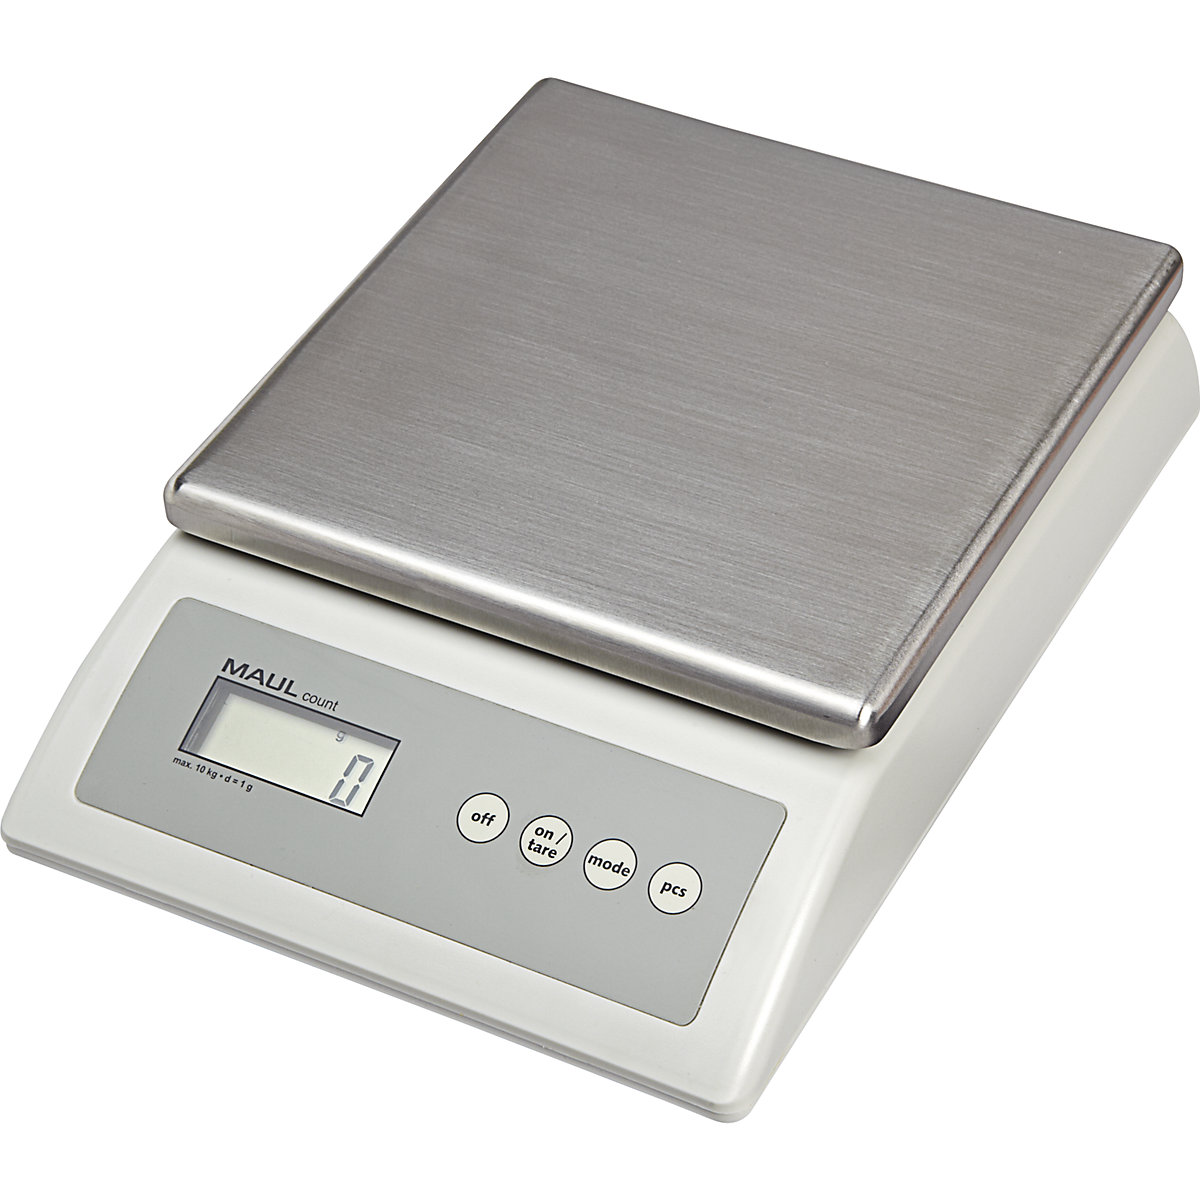 MAULcount counting scales – MAUL